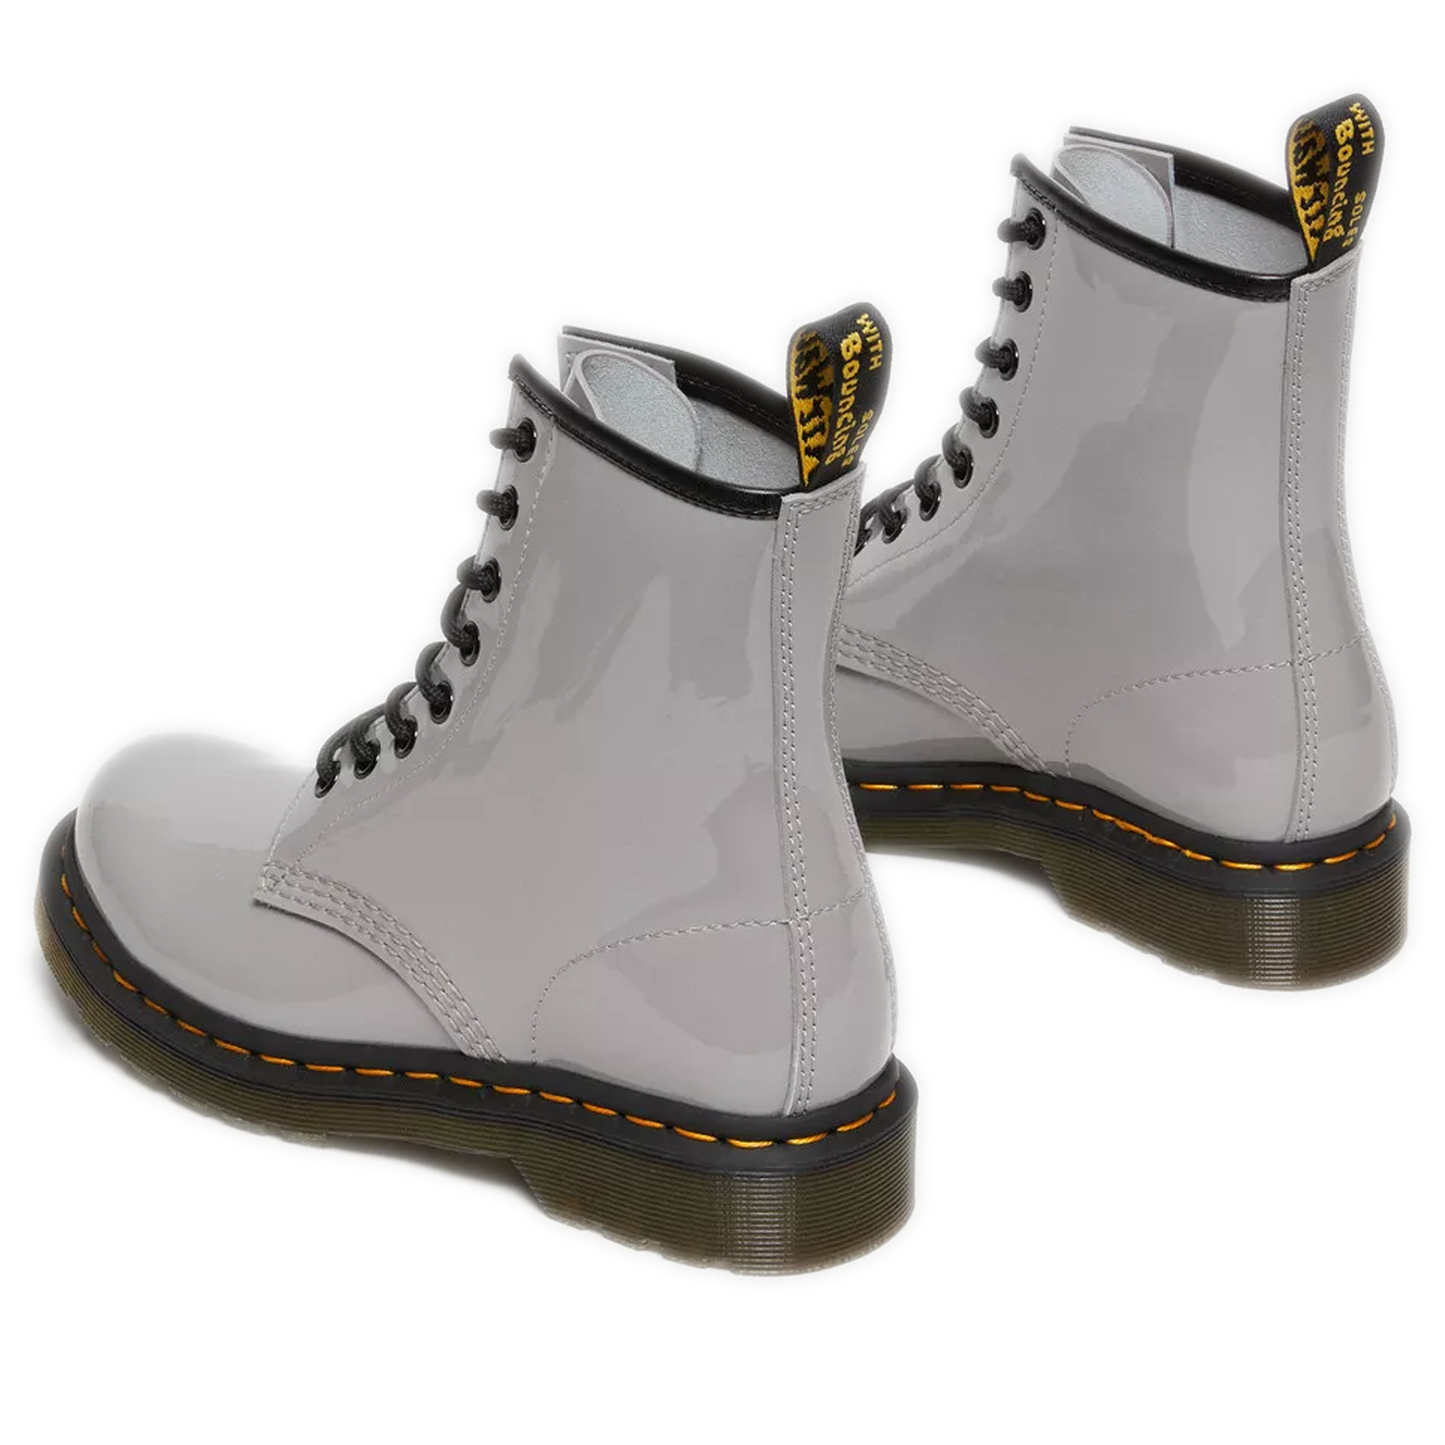 Women's Dr. Martens 1460 Patent Leather Lace Up Boots - Grey Lucido/ Patent Lamper